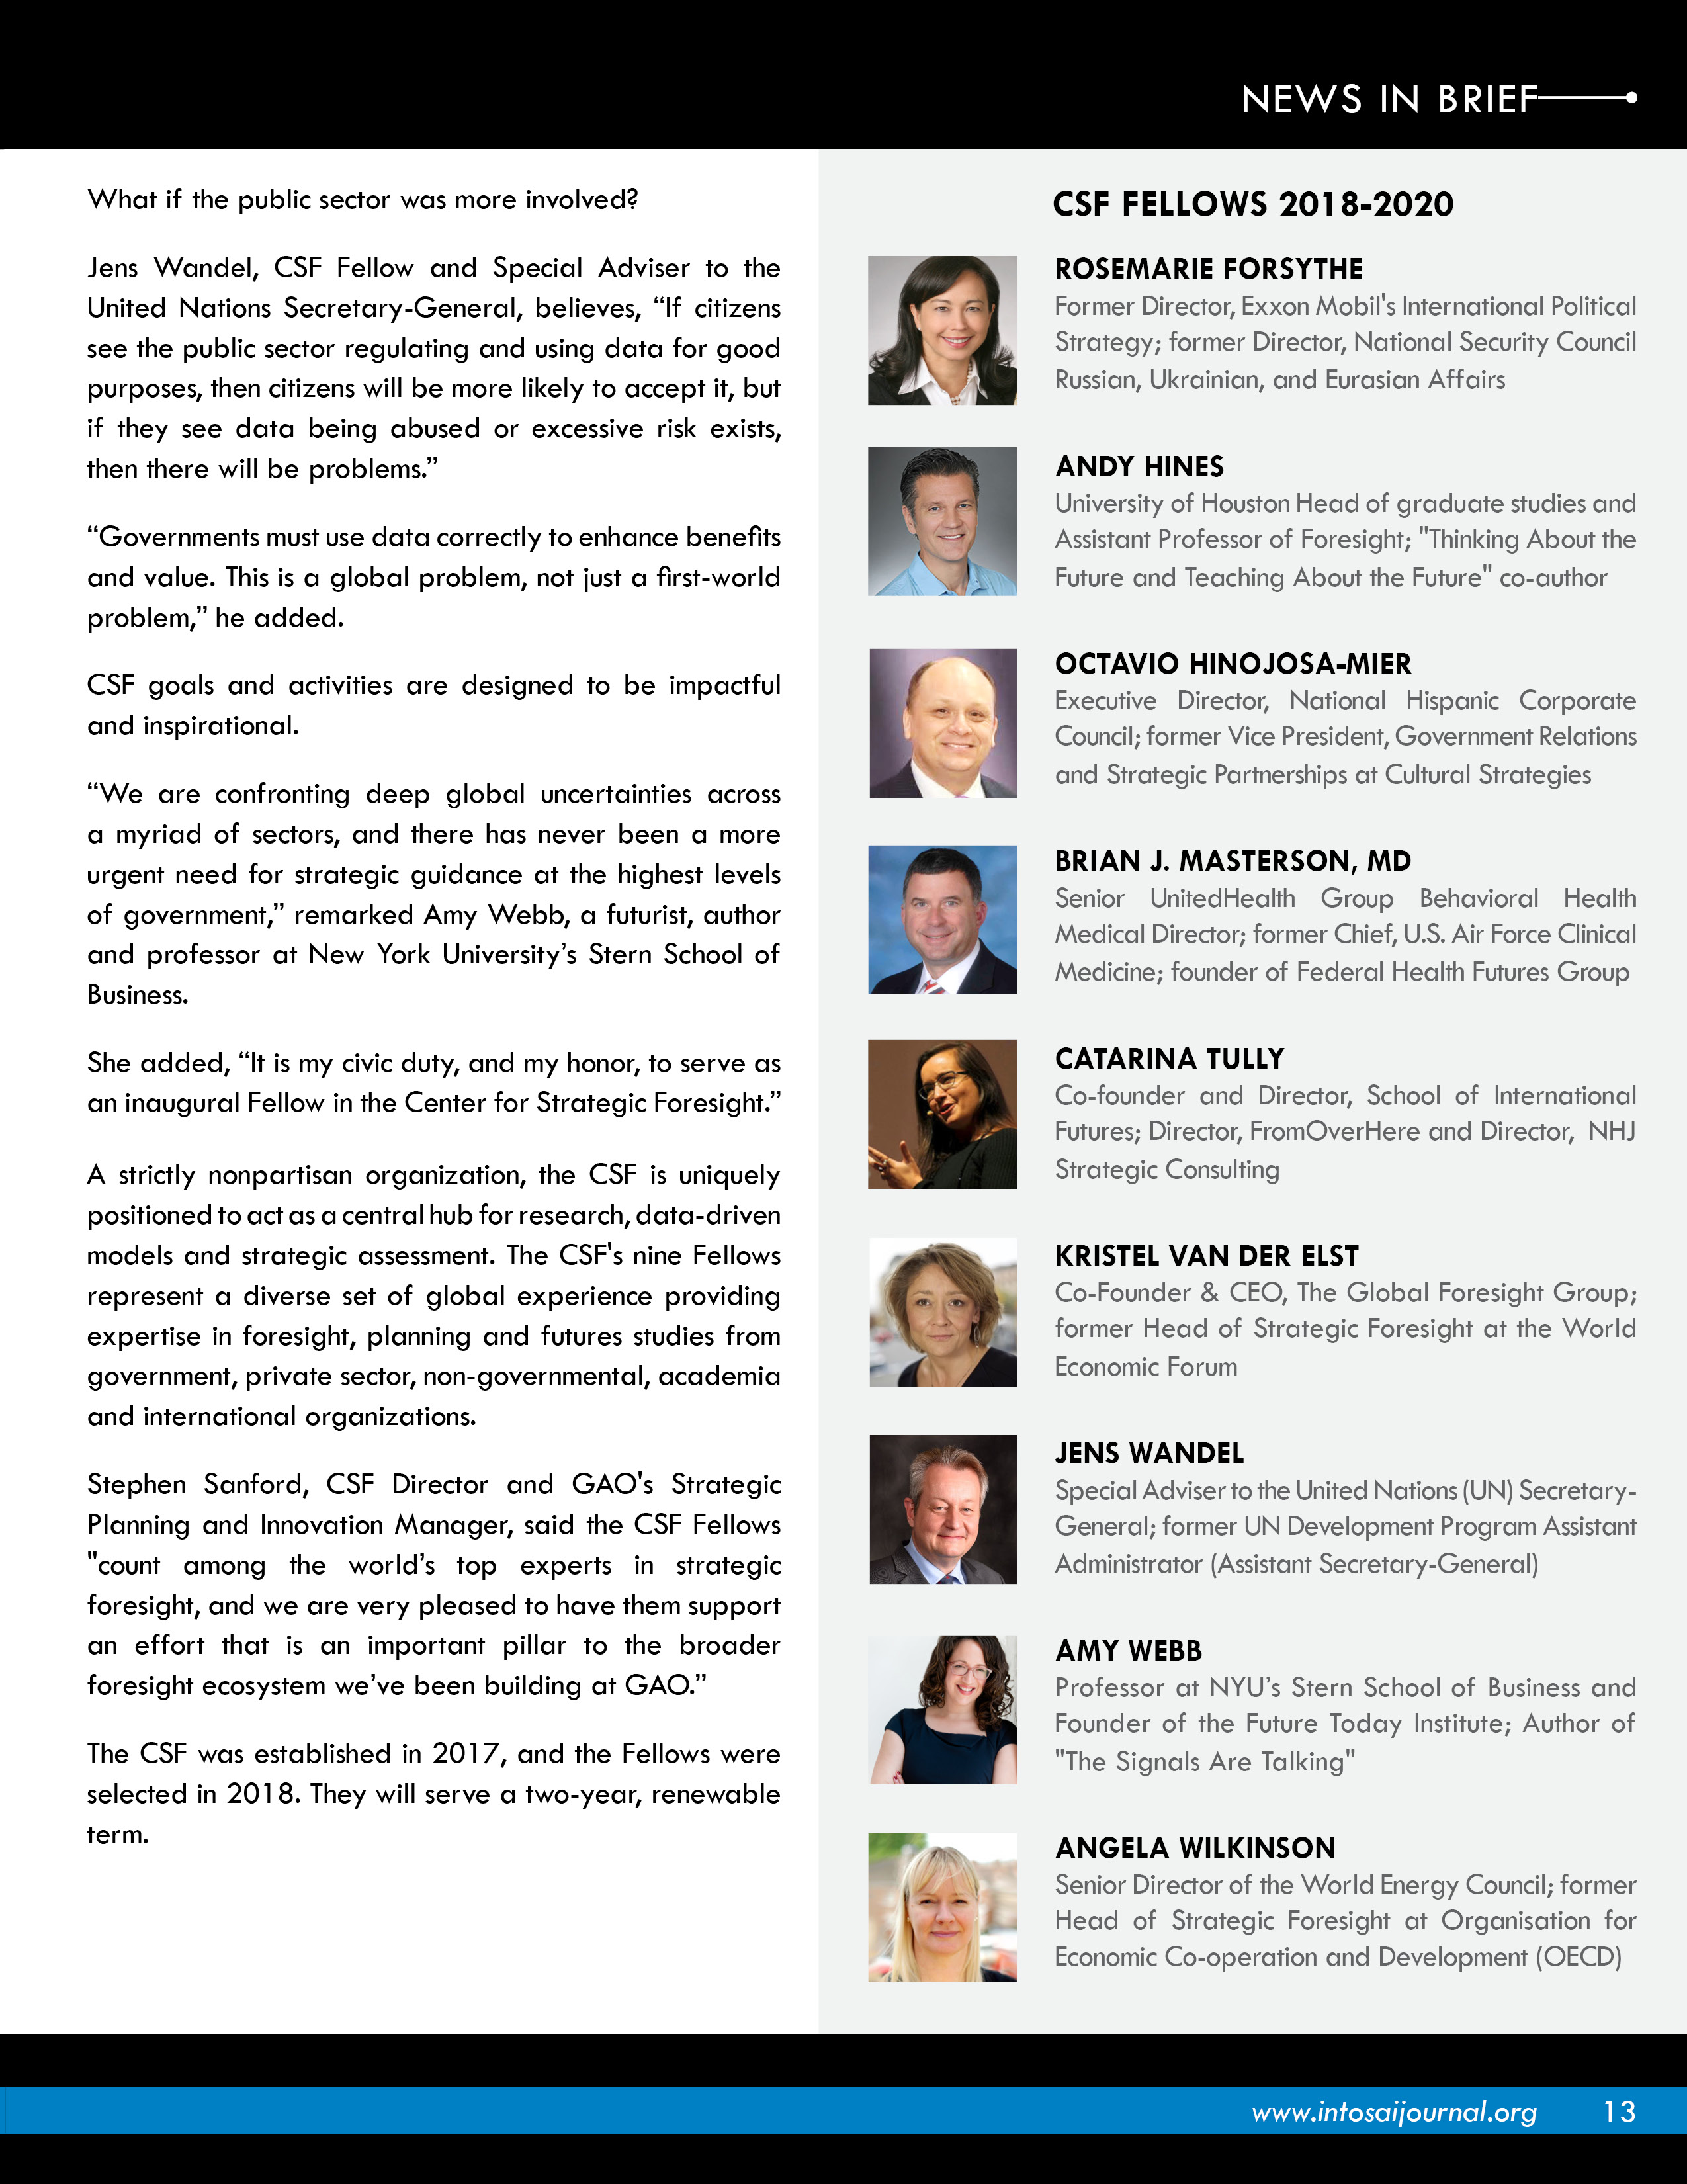 News from the US_CSF Launches Inaugural Meeting_Page2